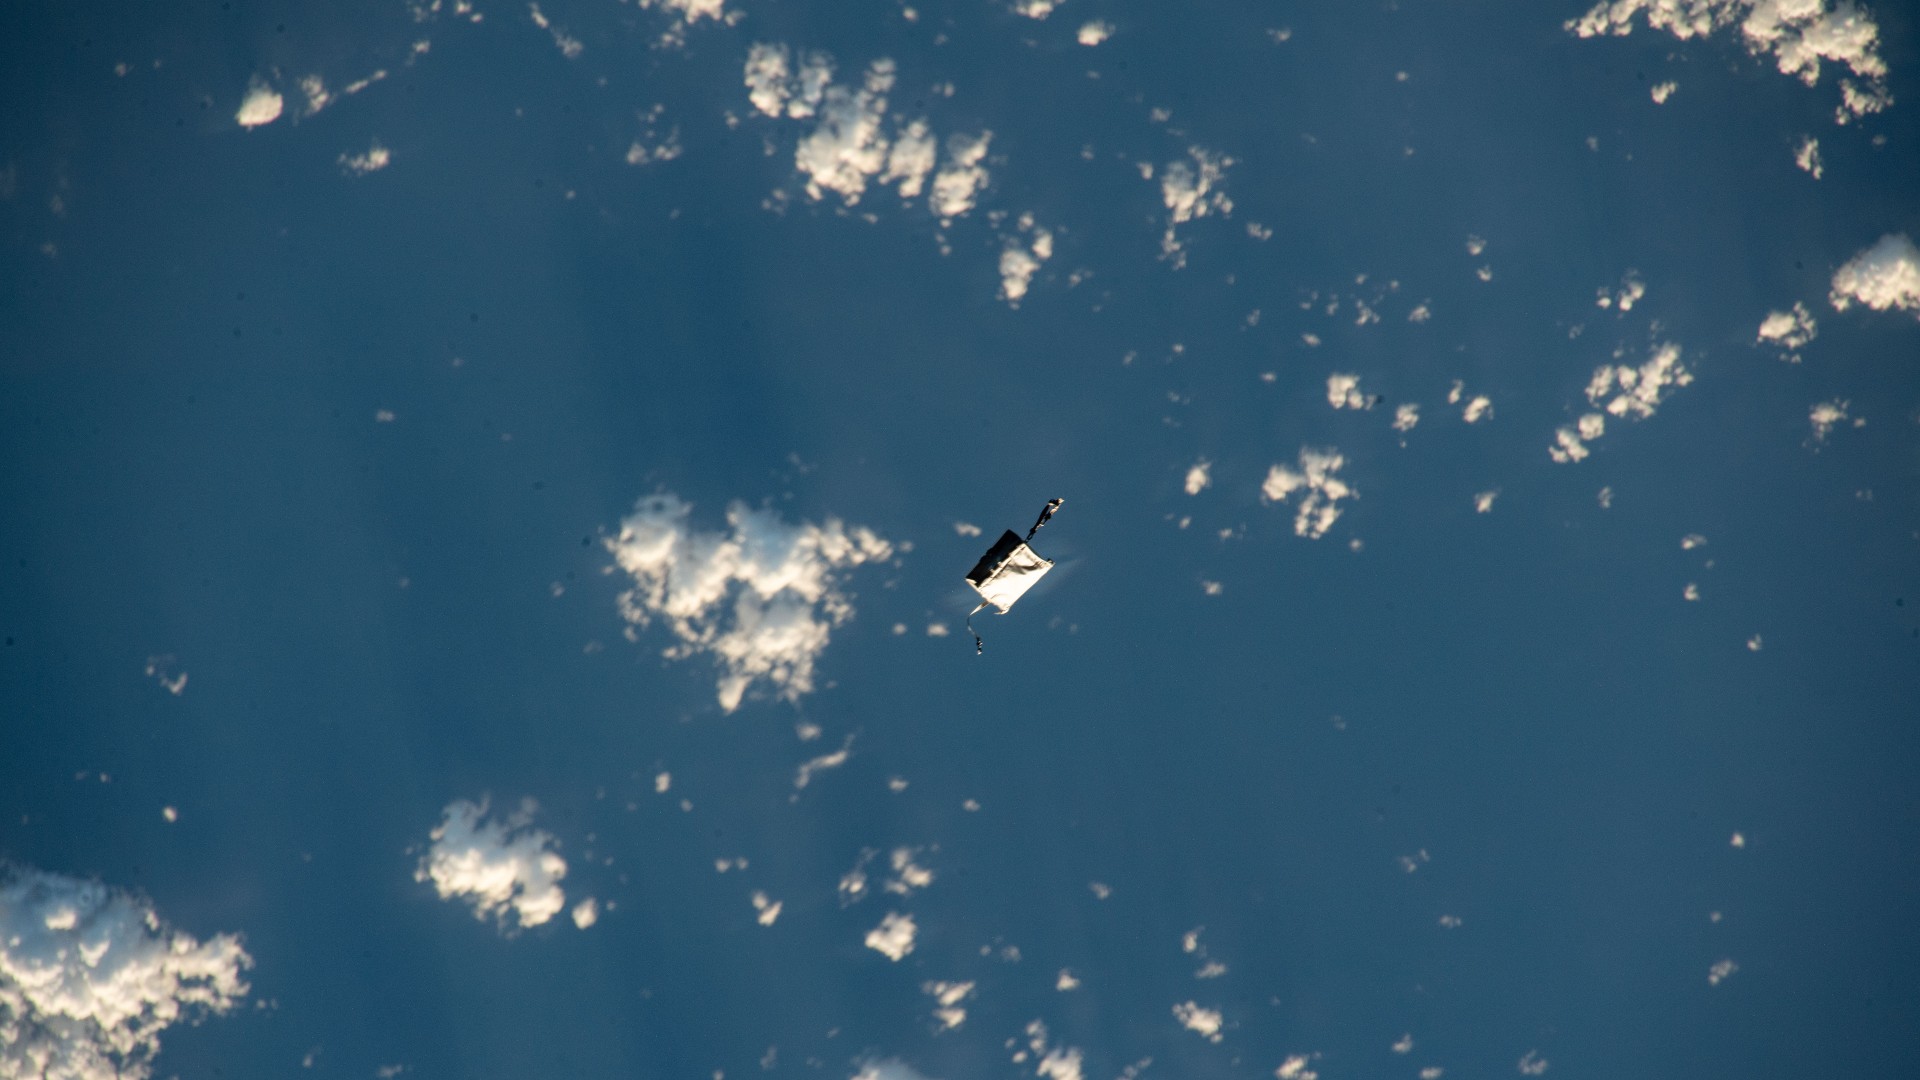 Space debris distorts a photo of astronaut on the ISS